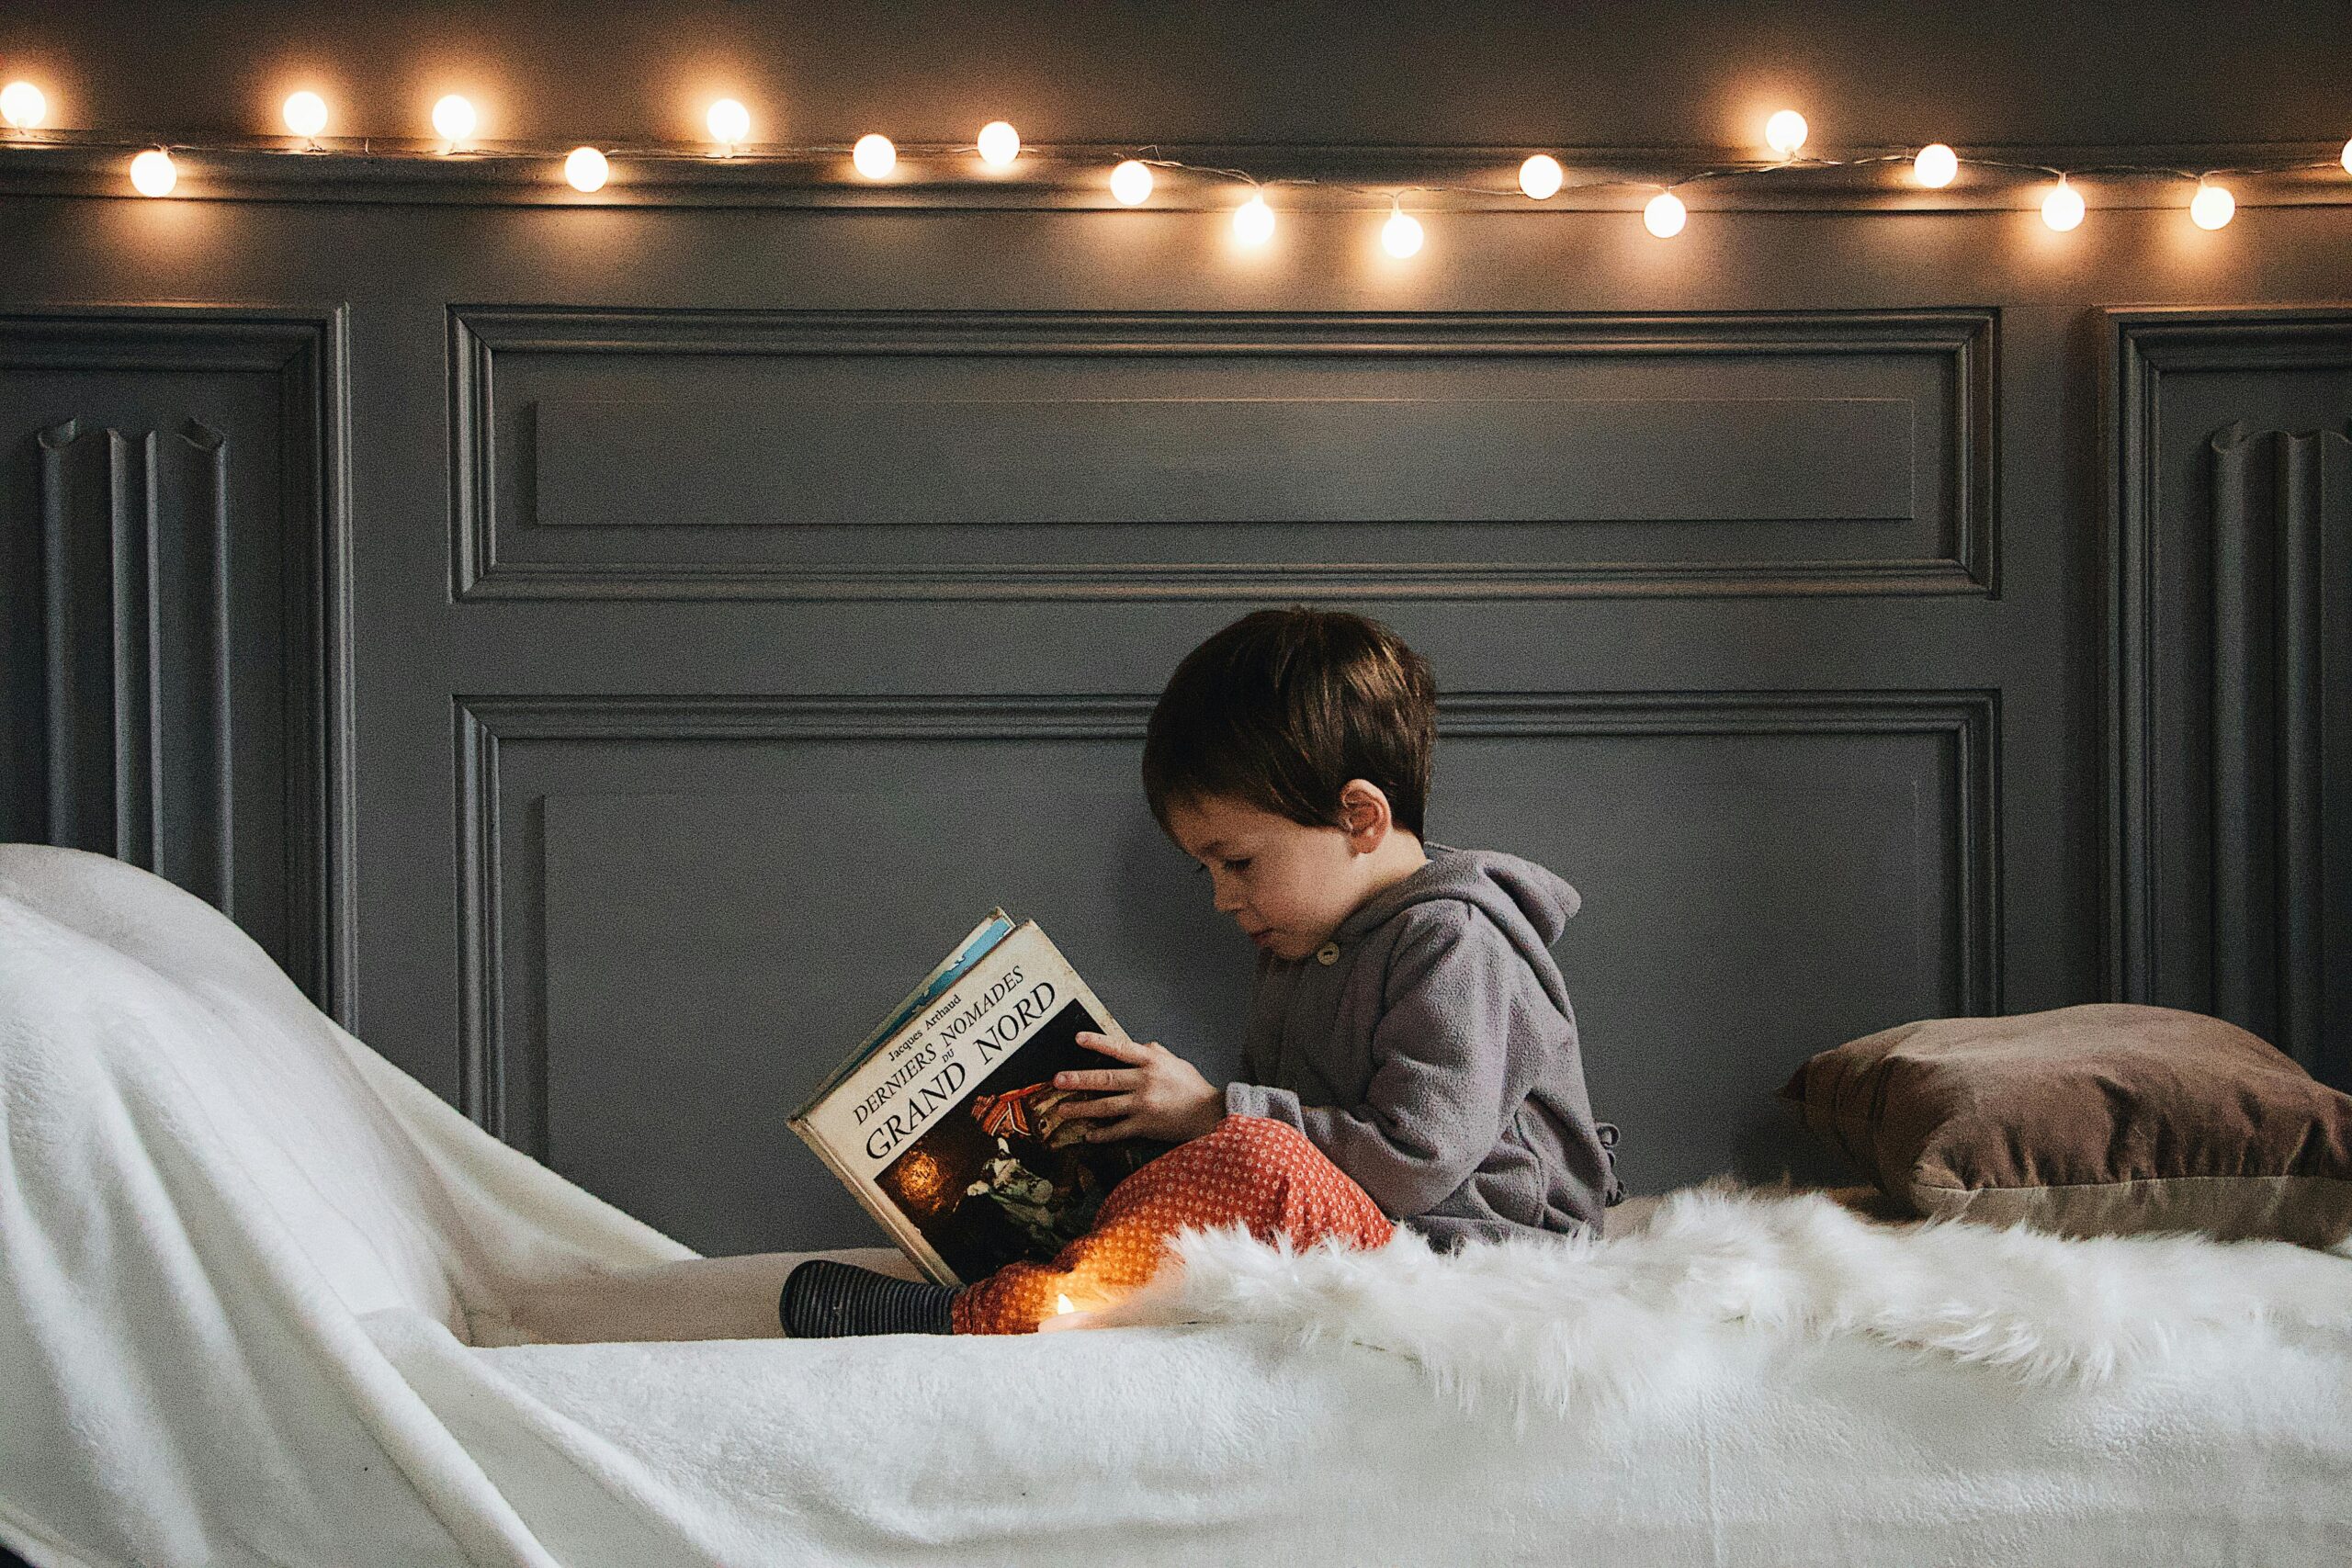 A child reading a book on a bed with fairy lights in the background, creating a cozy atmosphere.